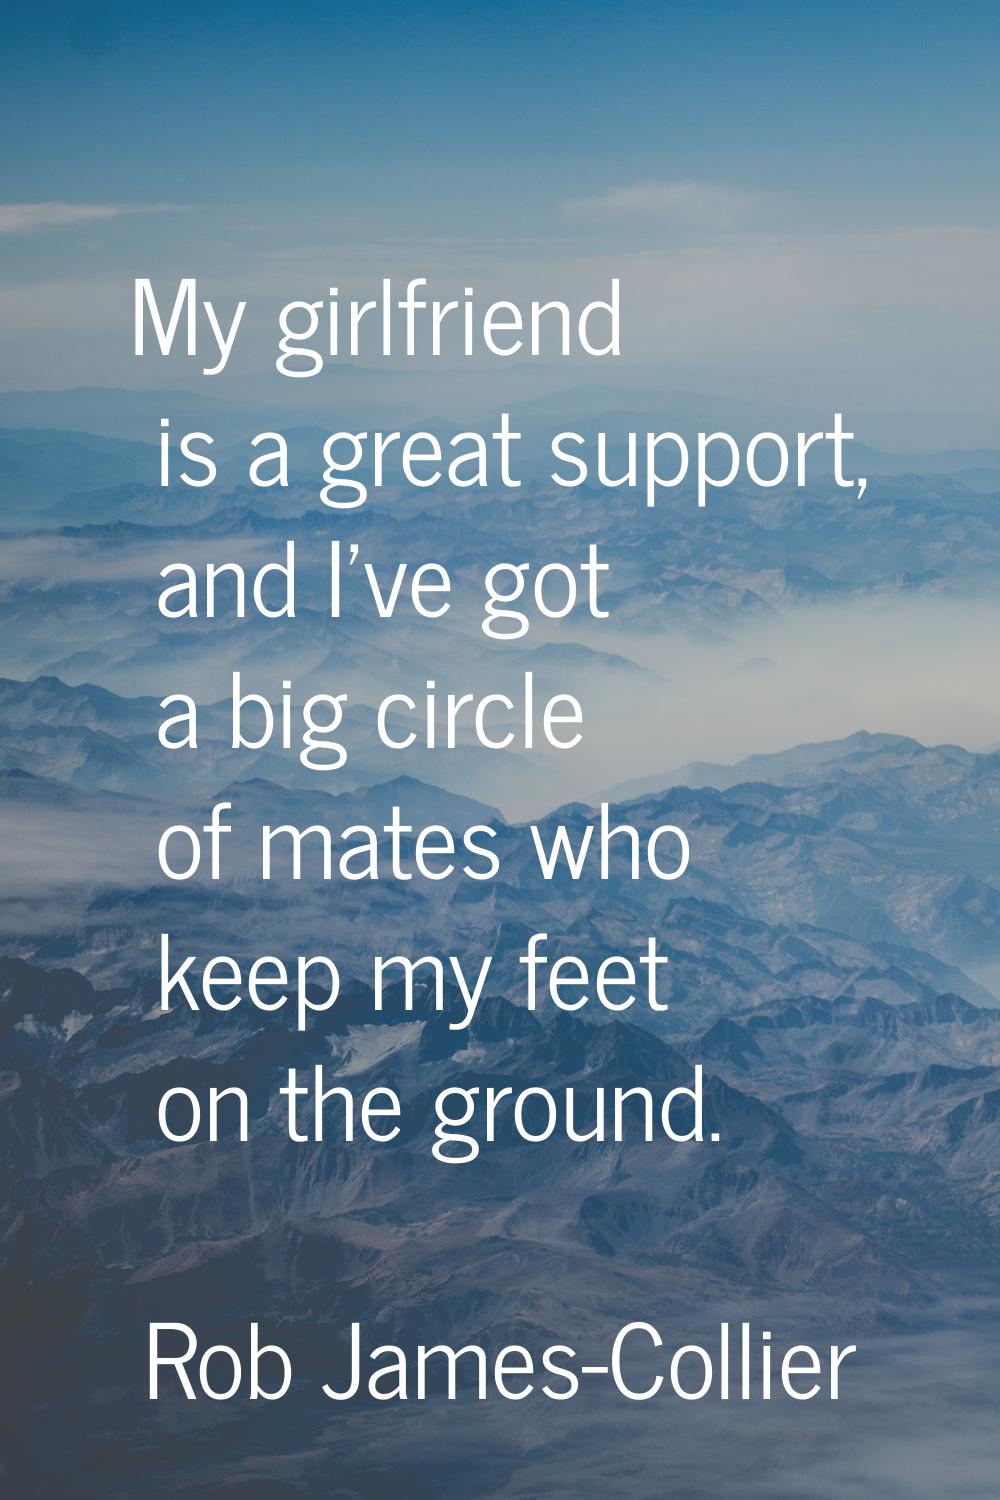 My girlfriend is a great support, and I've got a big circle of mates who keep my feet on the ground